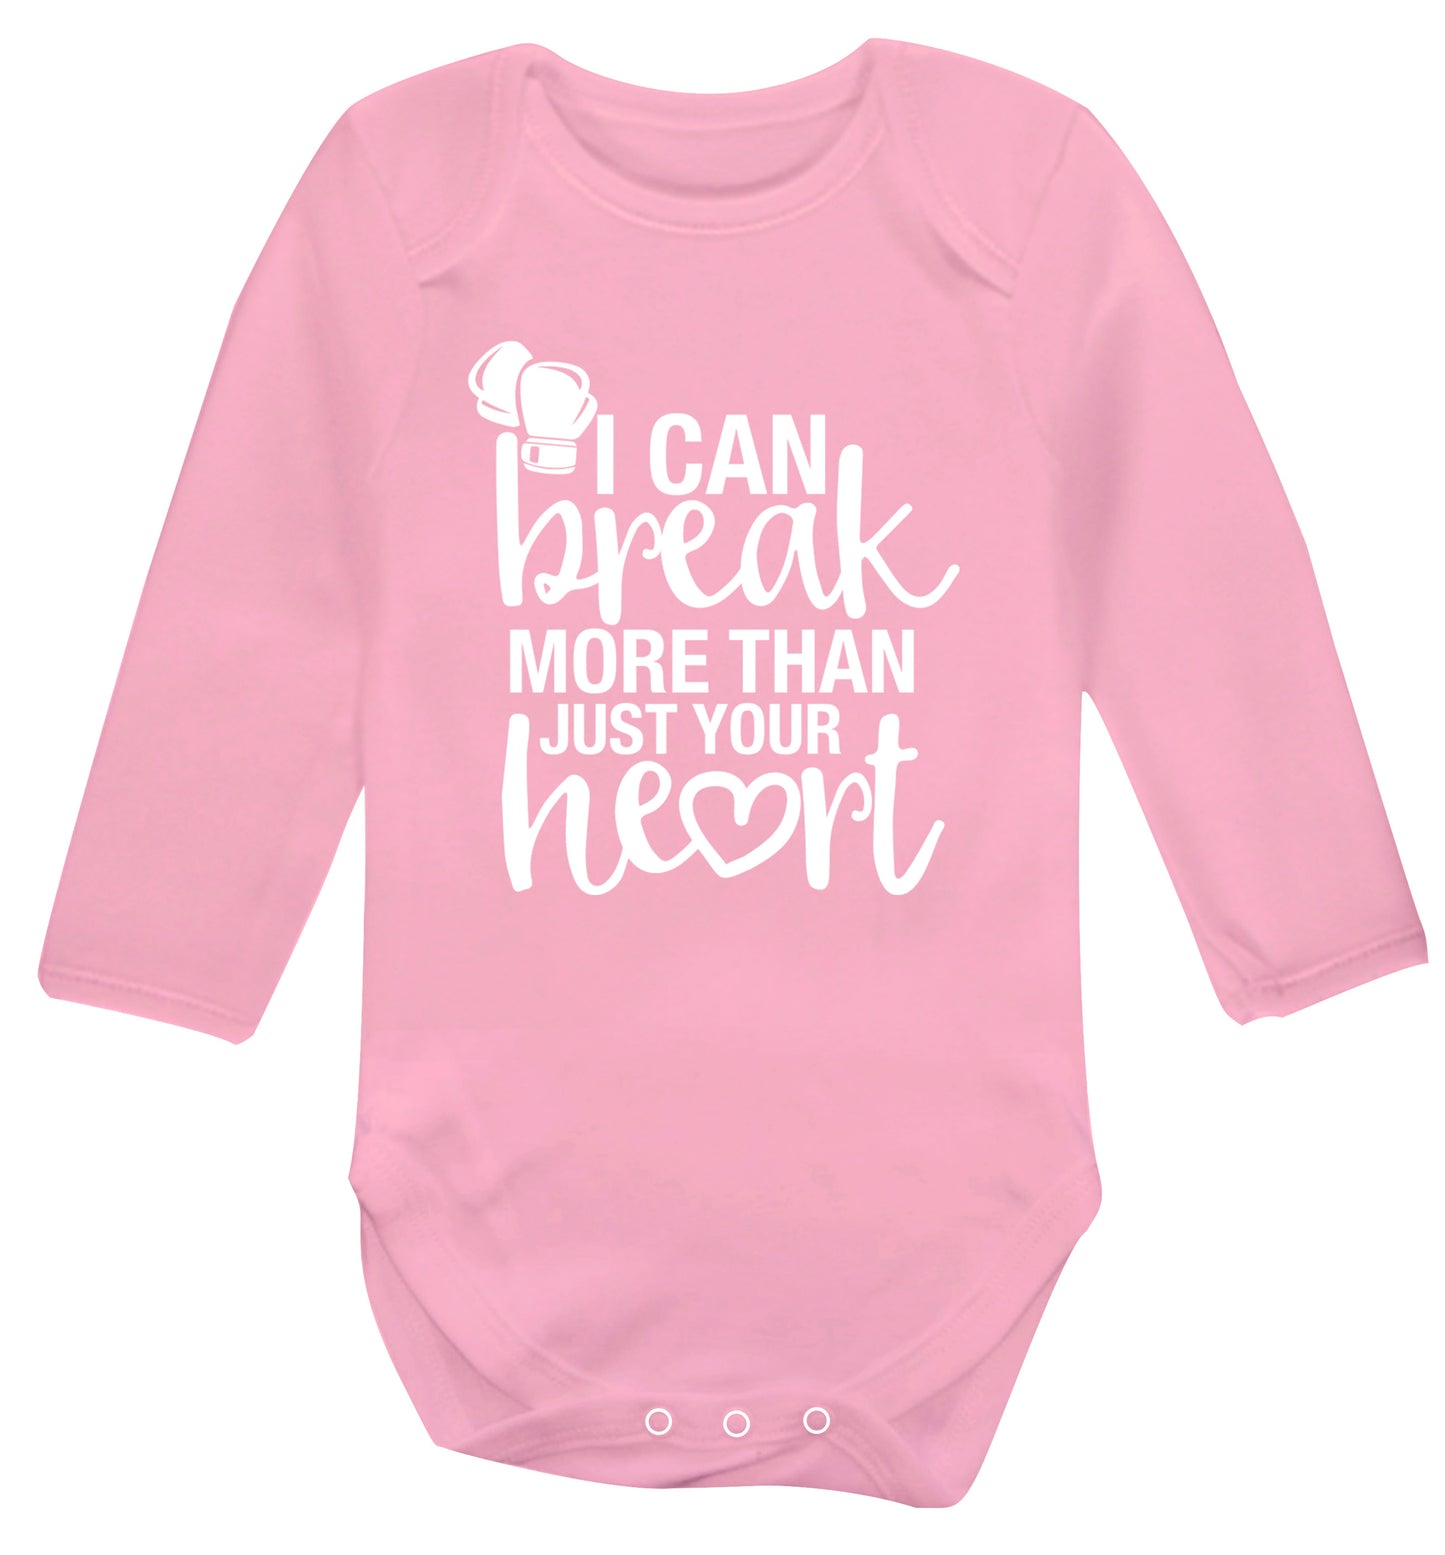 I can break more than just your heart Baby Vest long sleeved pale pink 6-12 months